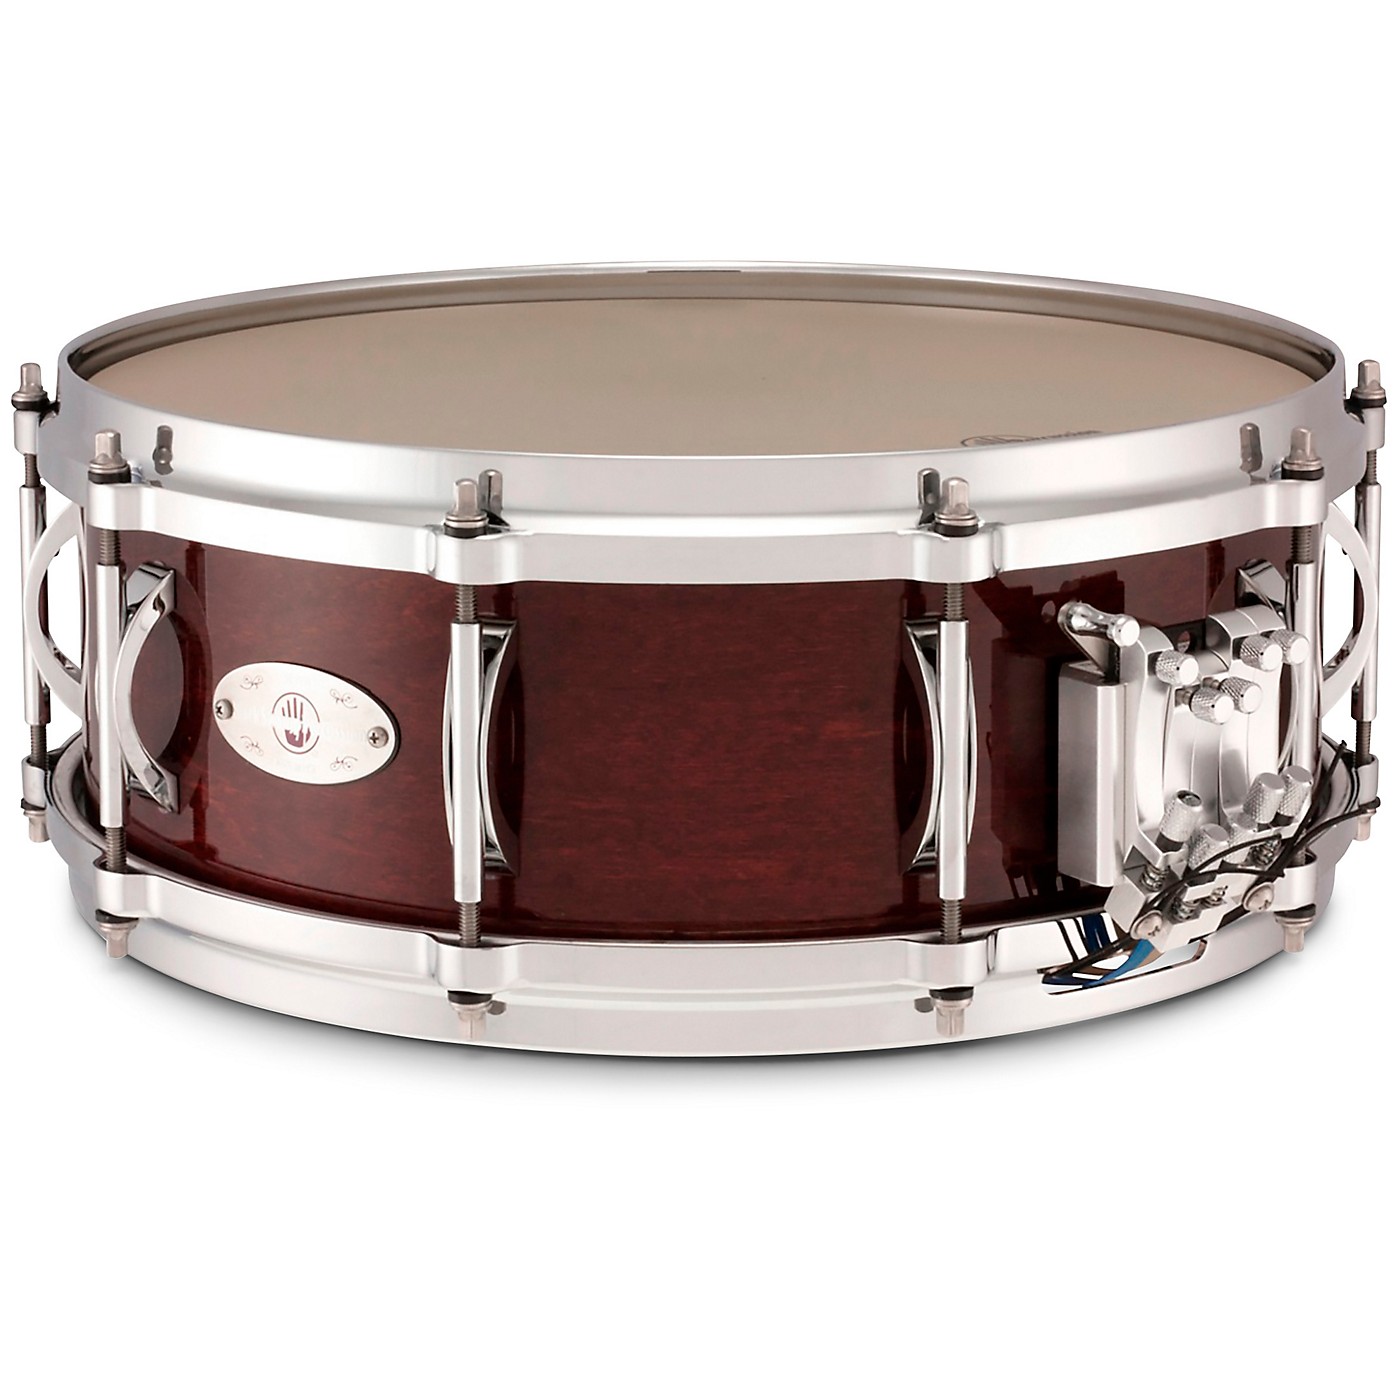 Black Swamp Percussion Multisonic Maple Shell Snare Drum thumbnail